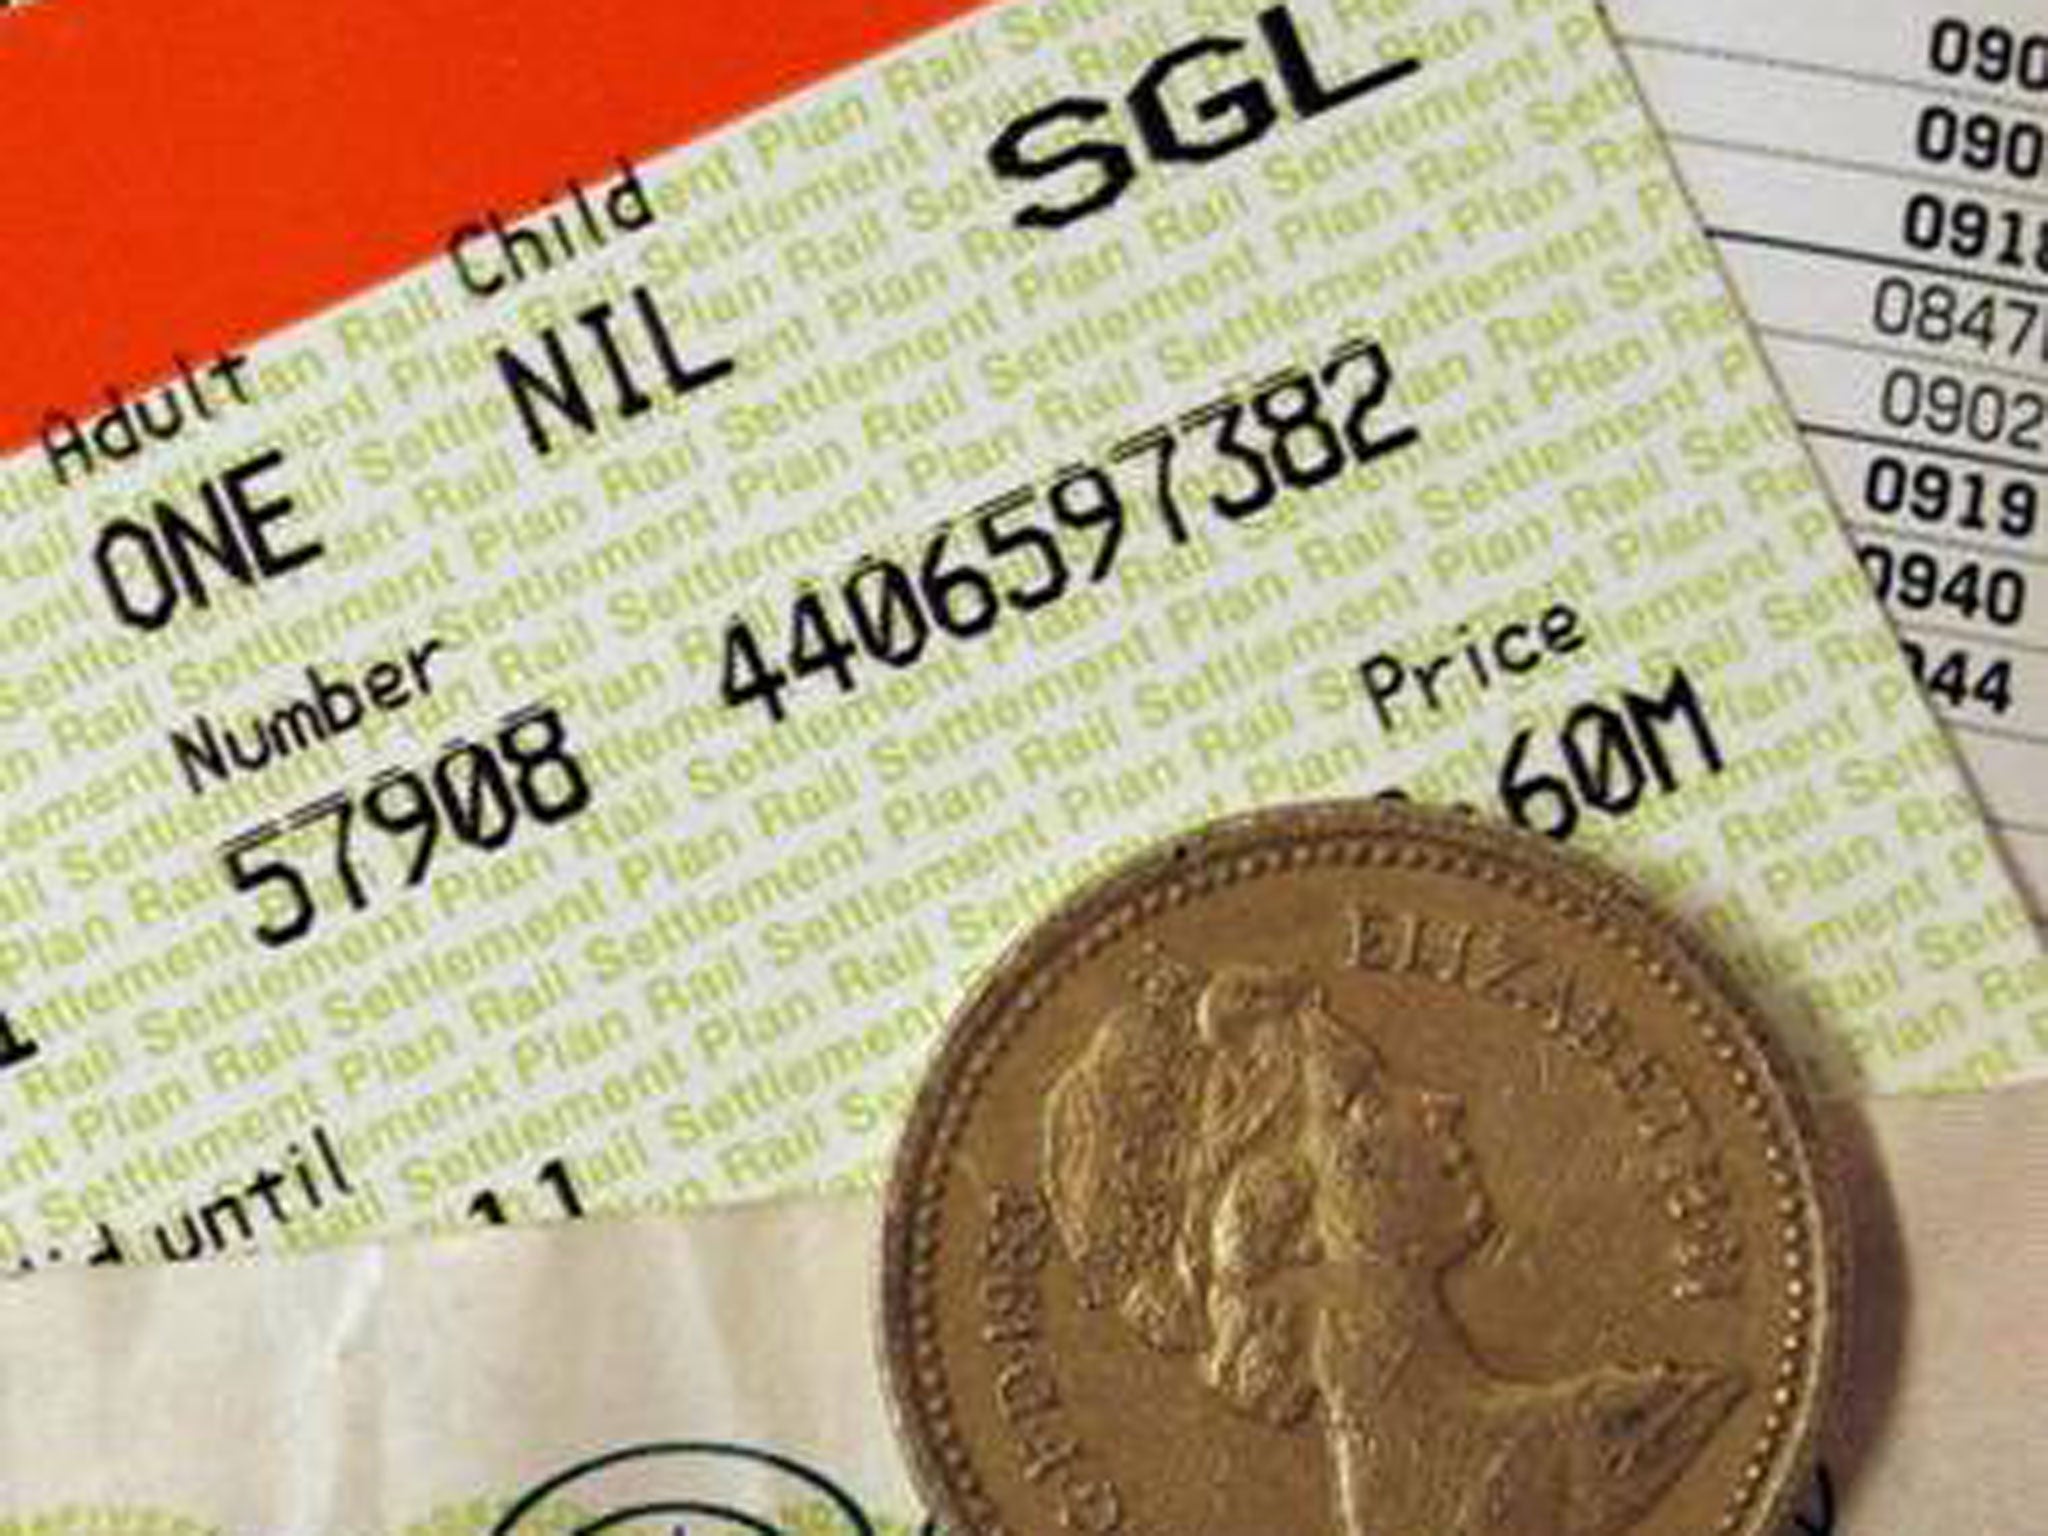 One reader got in touch this week after the fare for his regular train trip from Manchester to London climbed by 20 per cent